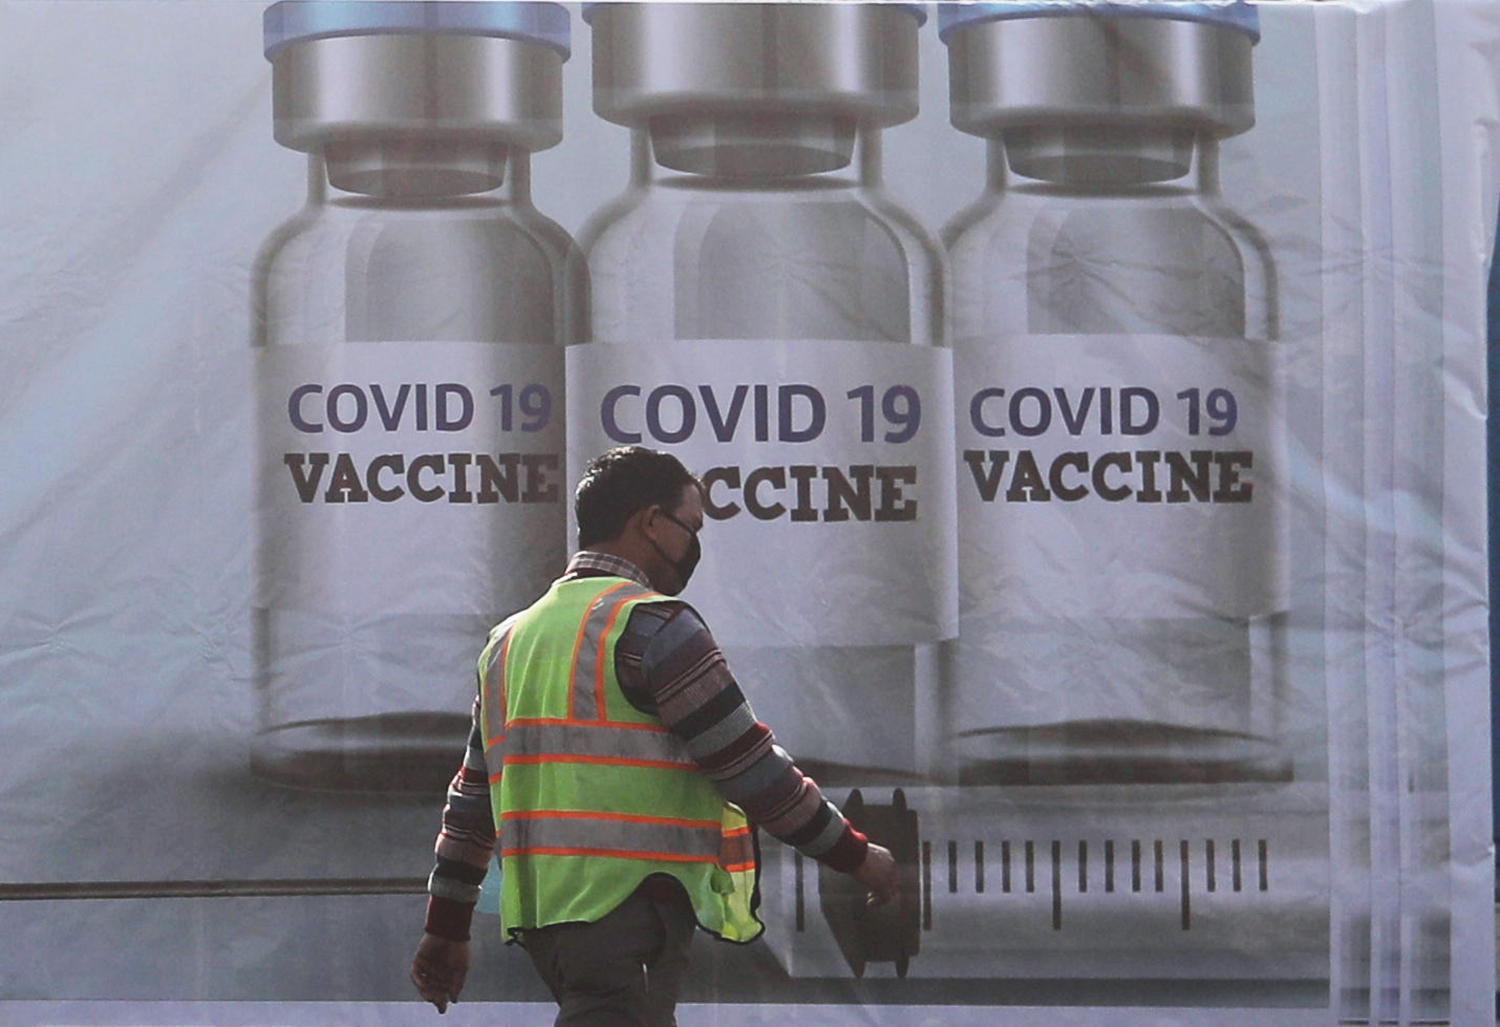 COVID-19 vaccination: Many doctors in government hospitals in Delhi refuse Covaxin